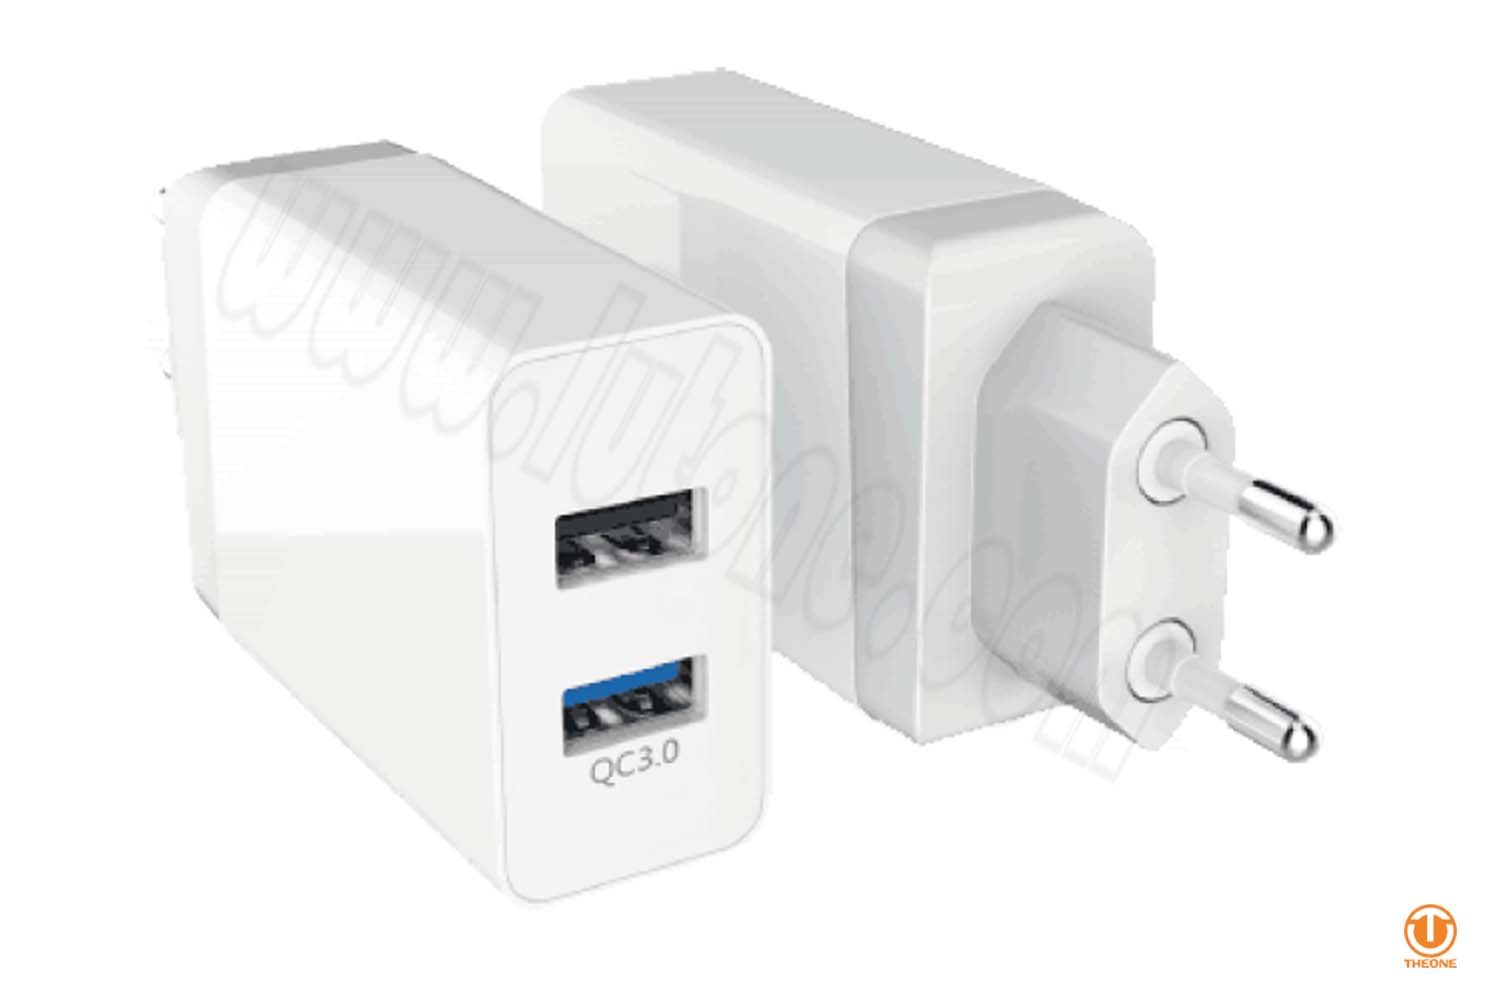 tq302-1 quick charger wall charger